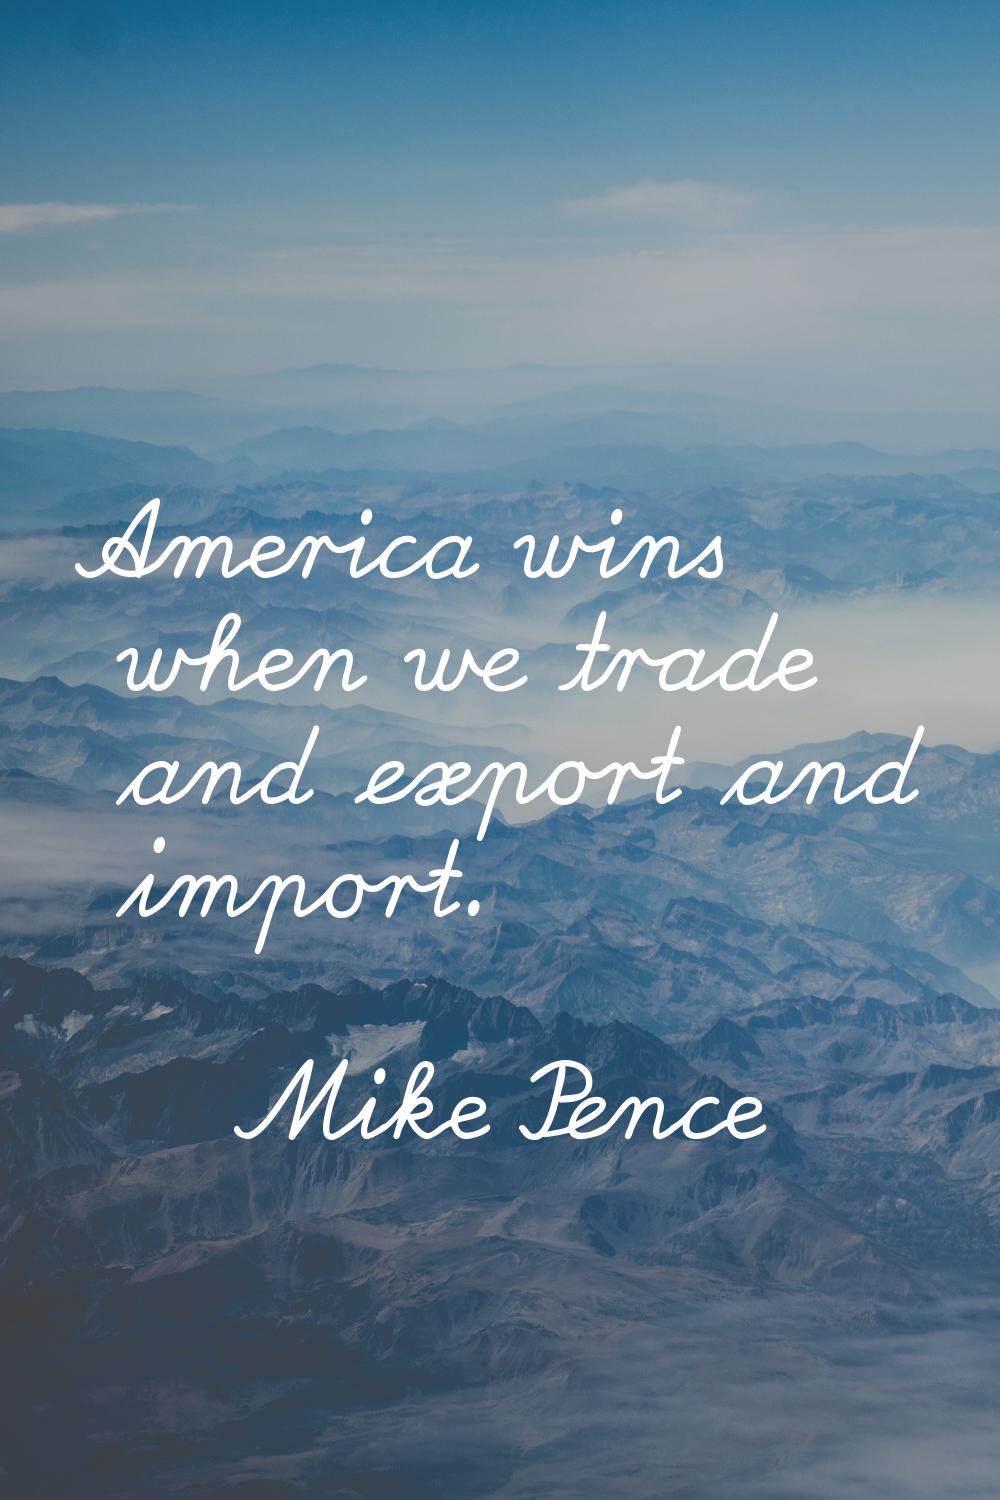 America wins when we trade and export and import.